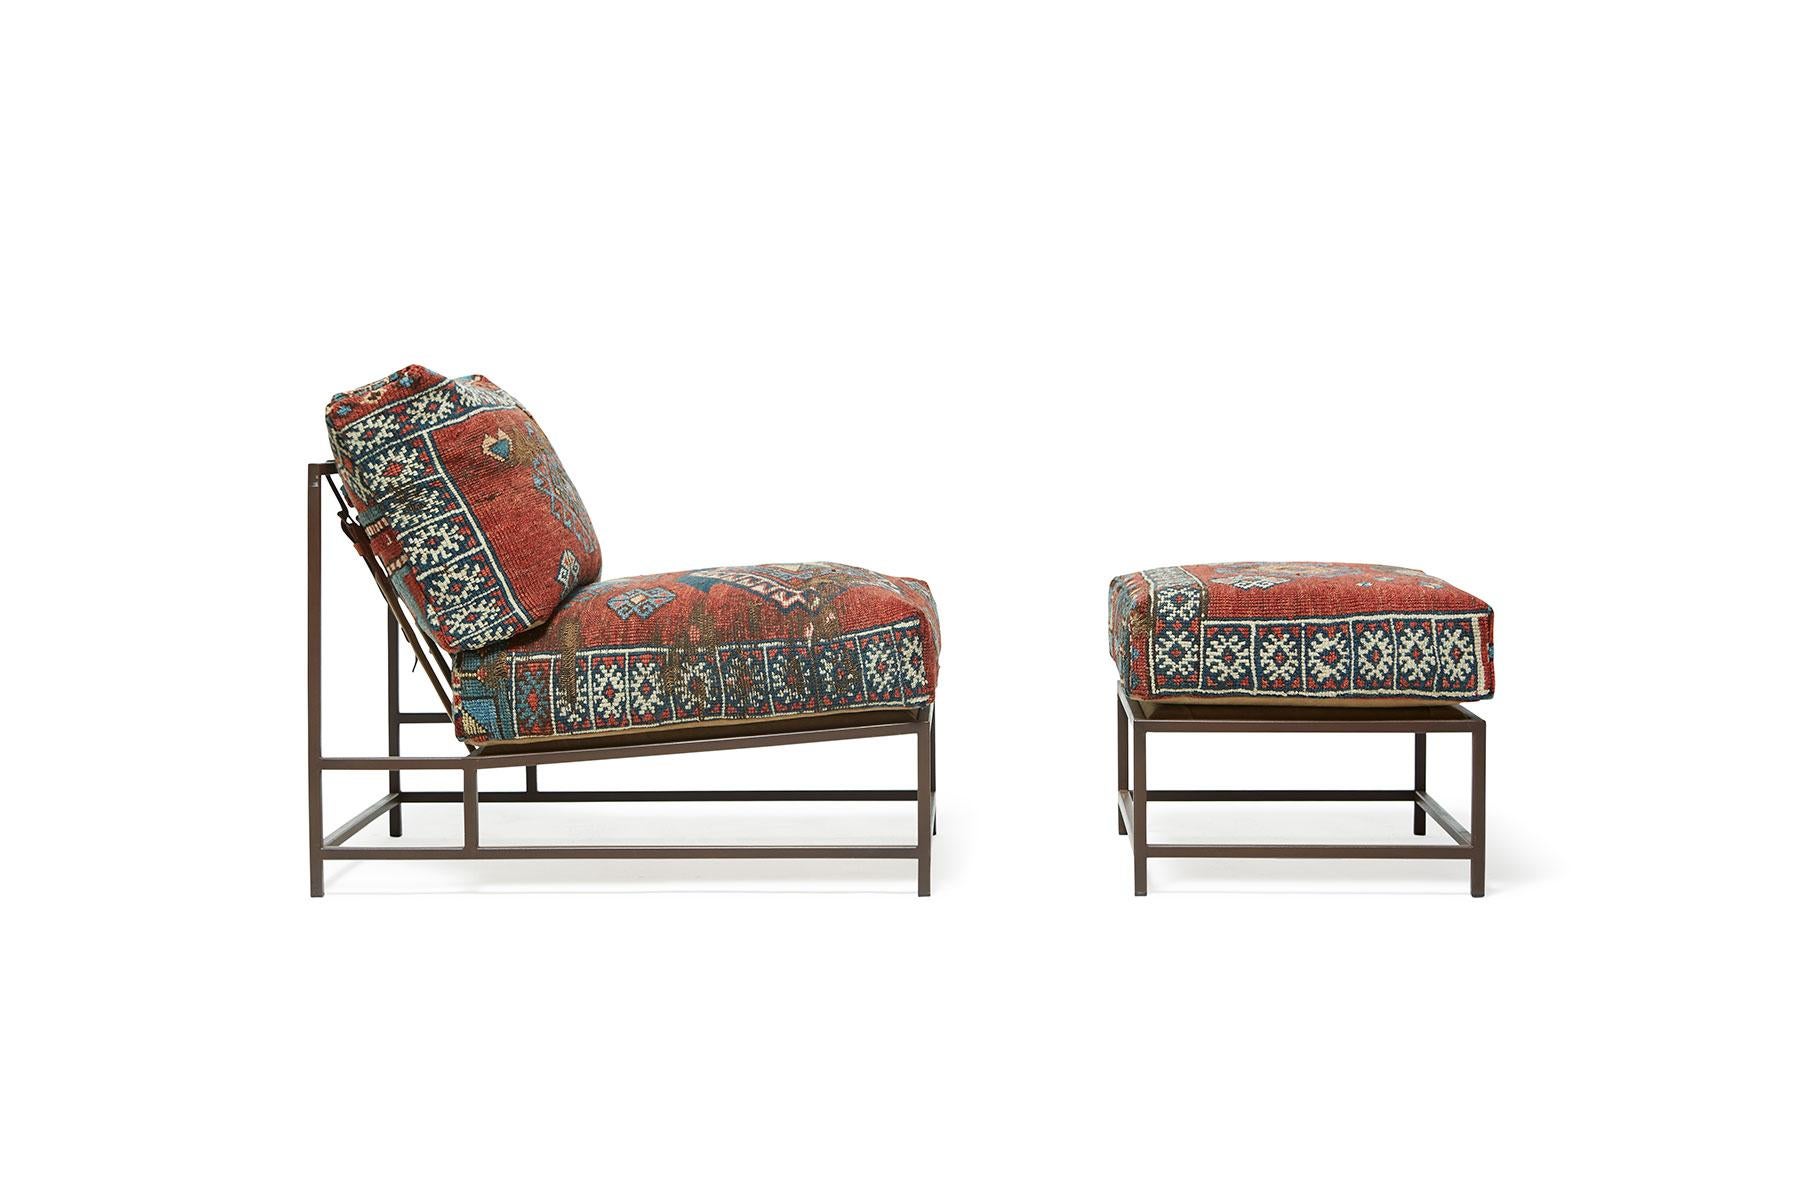 This unique chair and ottoman set in the style of Stephen Kenn's Inheritance Collection is upholstered with a 100-year-old Kazak Persian rug from the collection of Los Angeles-based King Kennedy rugs. These unique pieces have been lovingly repaired